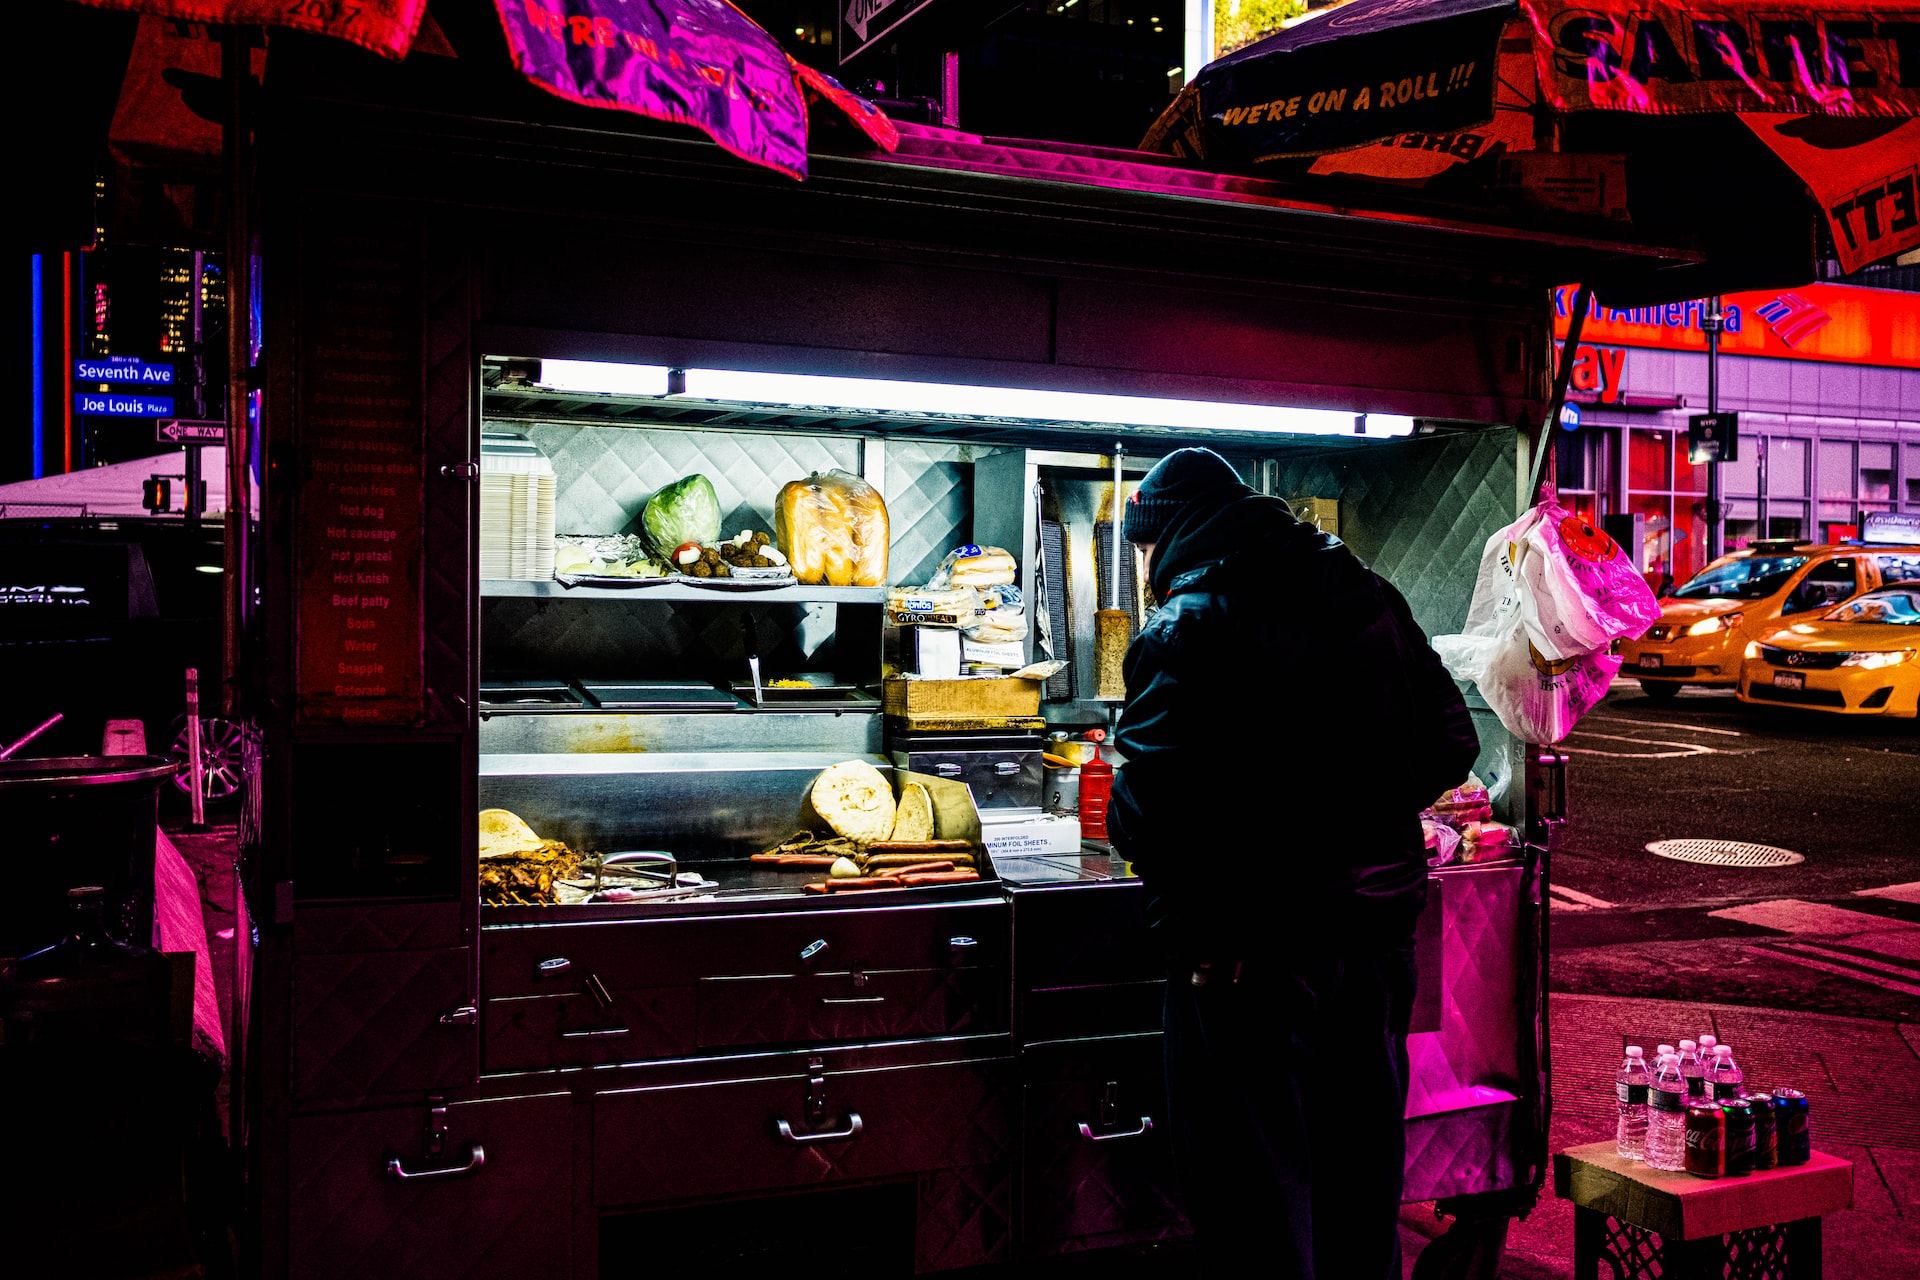 A man standing preparing in food in front of a Halal meat cart in NYC at night.